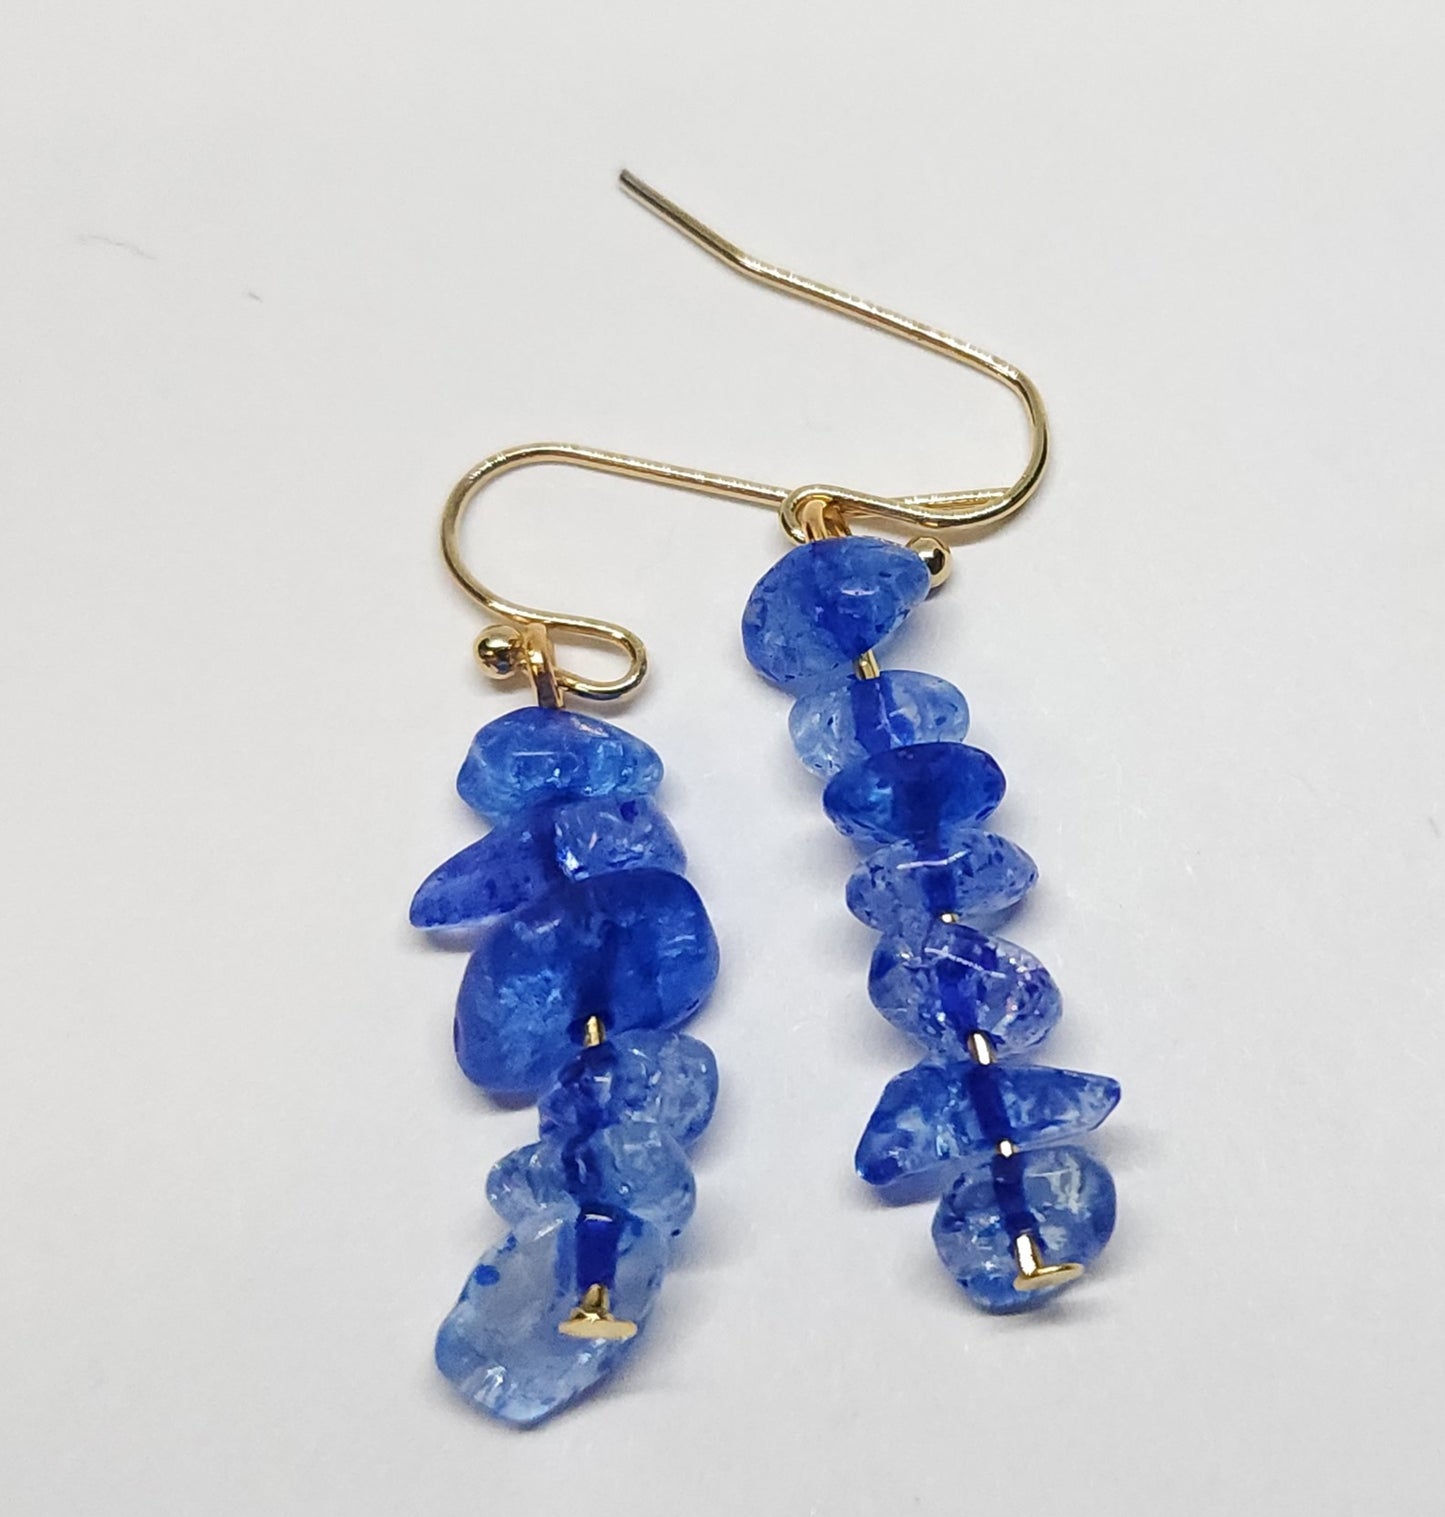 Dark blue glass minis with gold-coloured nickel-free hooks